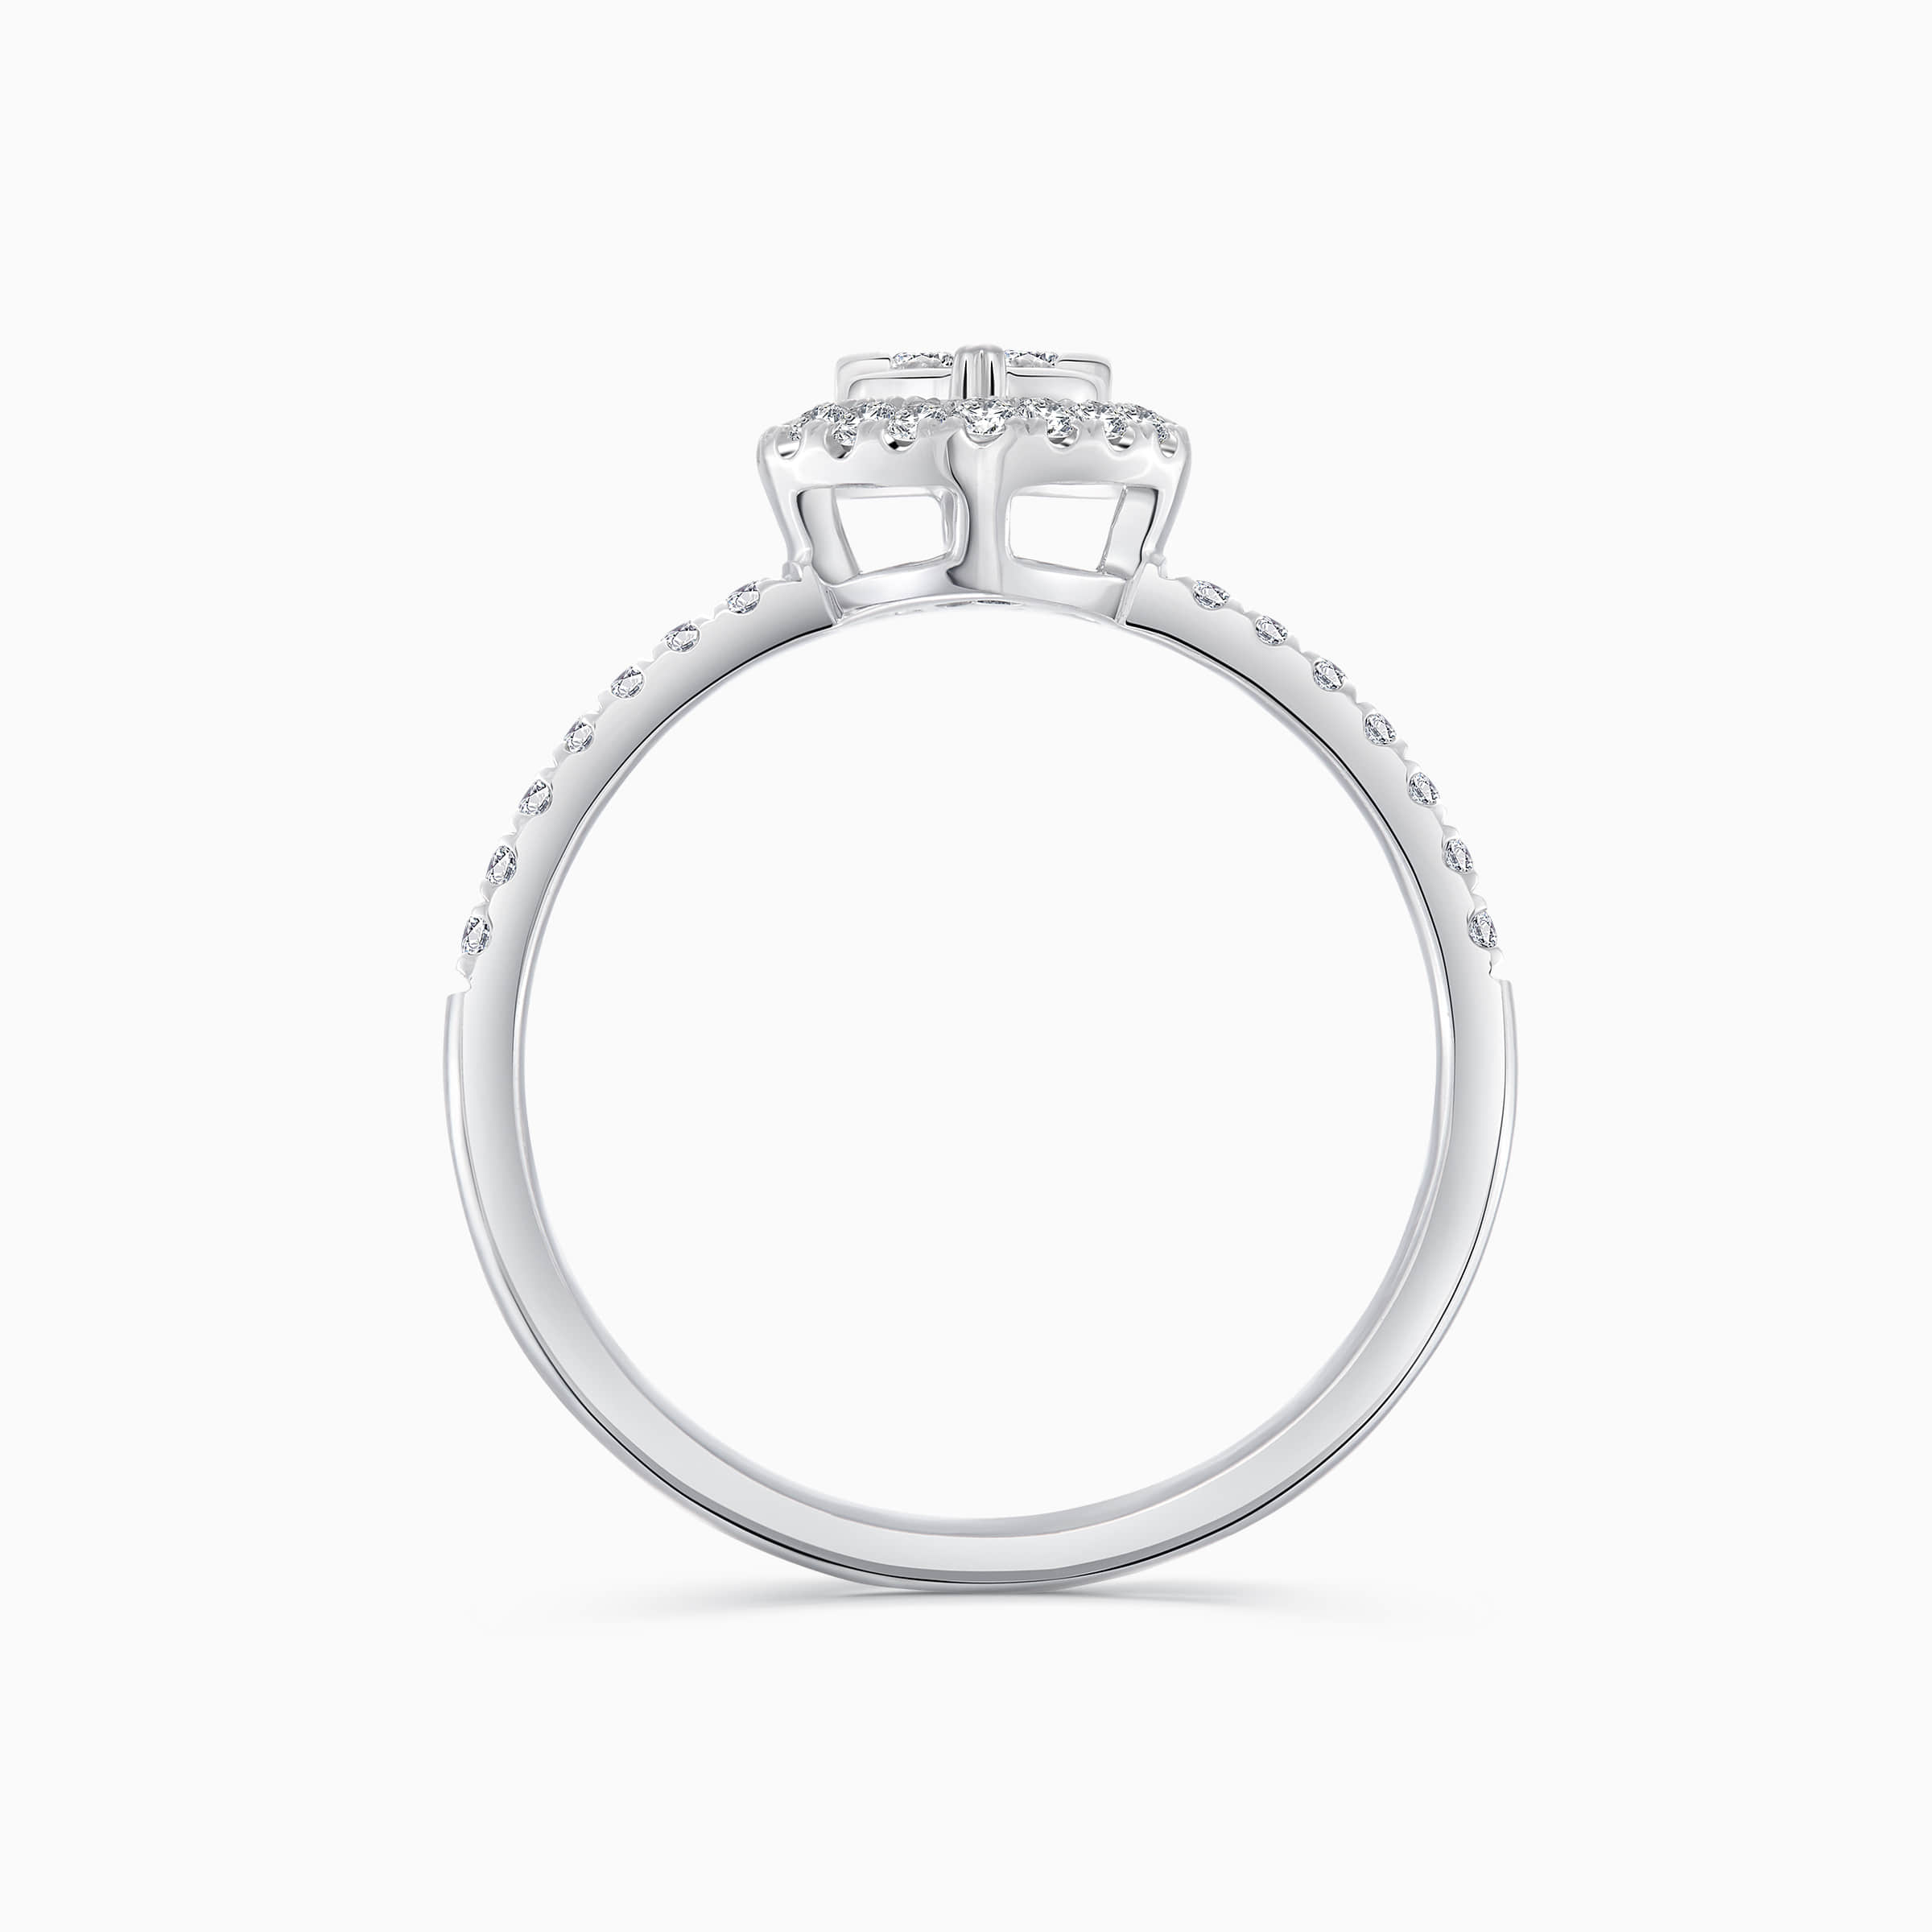 Darry Ring diamond heart shaped ring side view